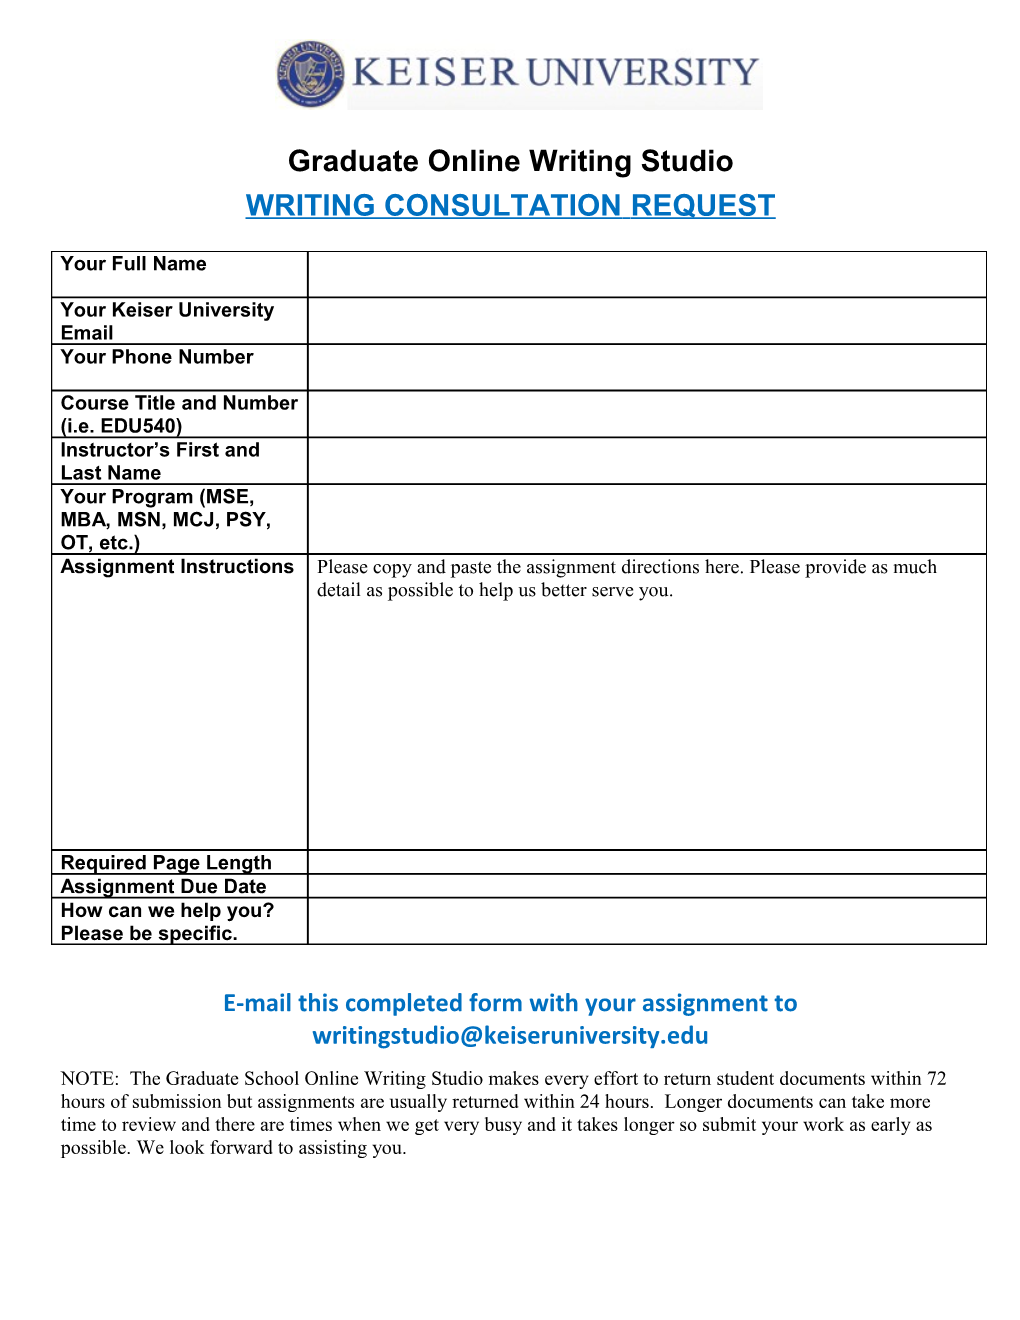 E-Mail This Completed Form with Your Assignment To